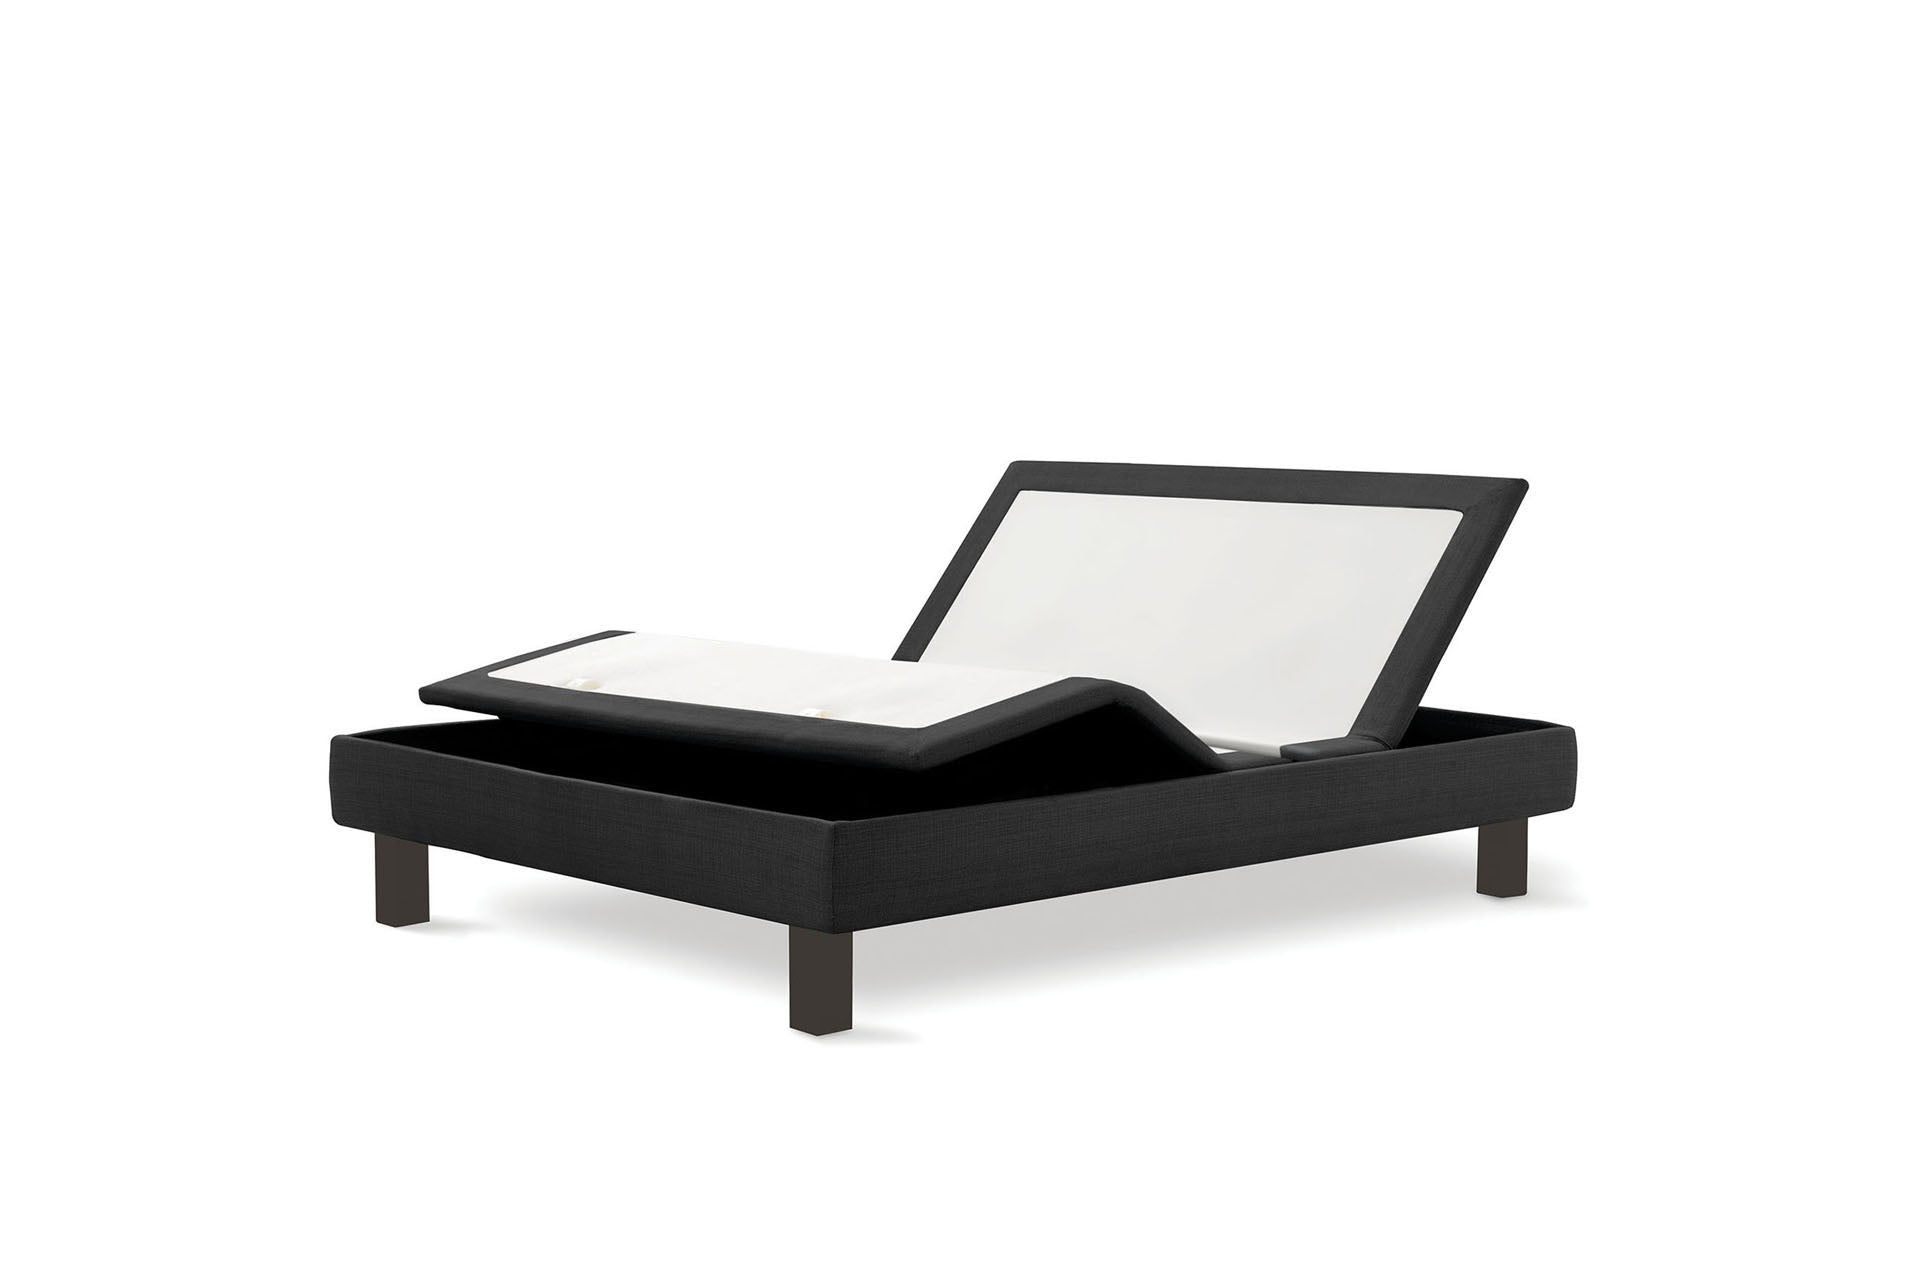 The New! E6+ Ergomotion Adjustable Bed featuring Extension Deck Deck Design.